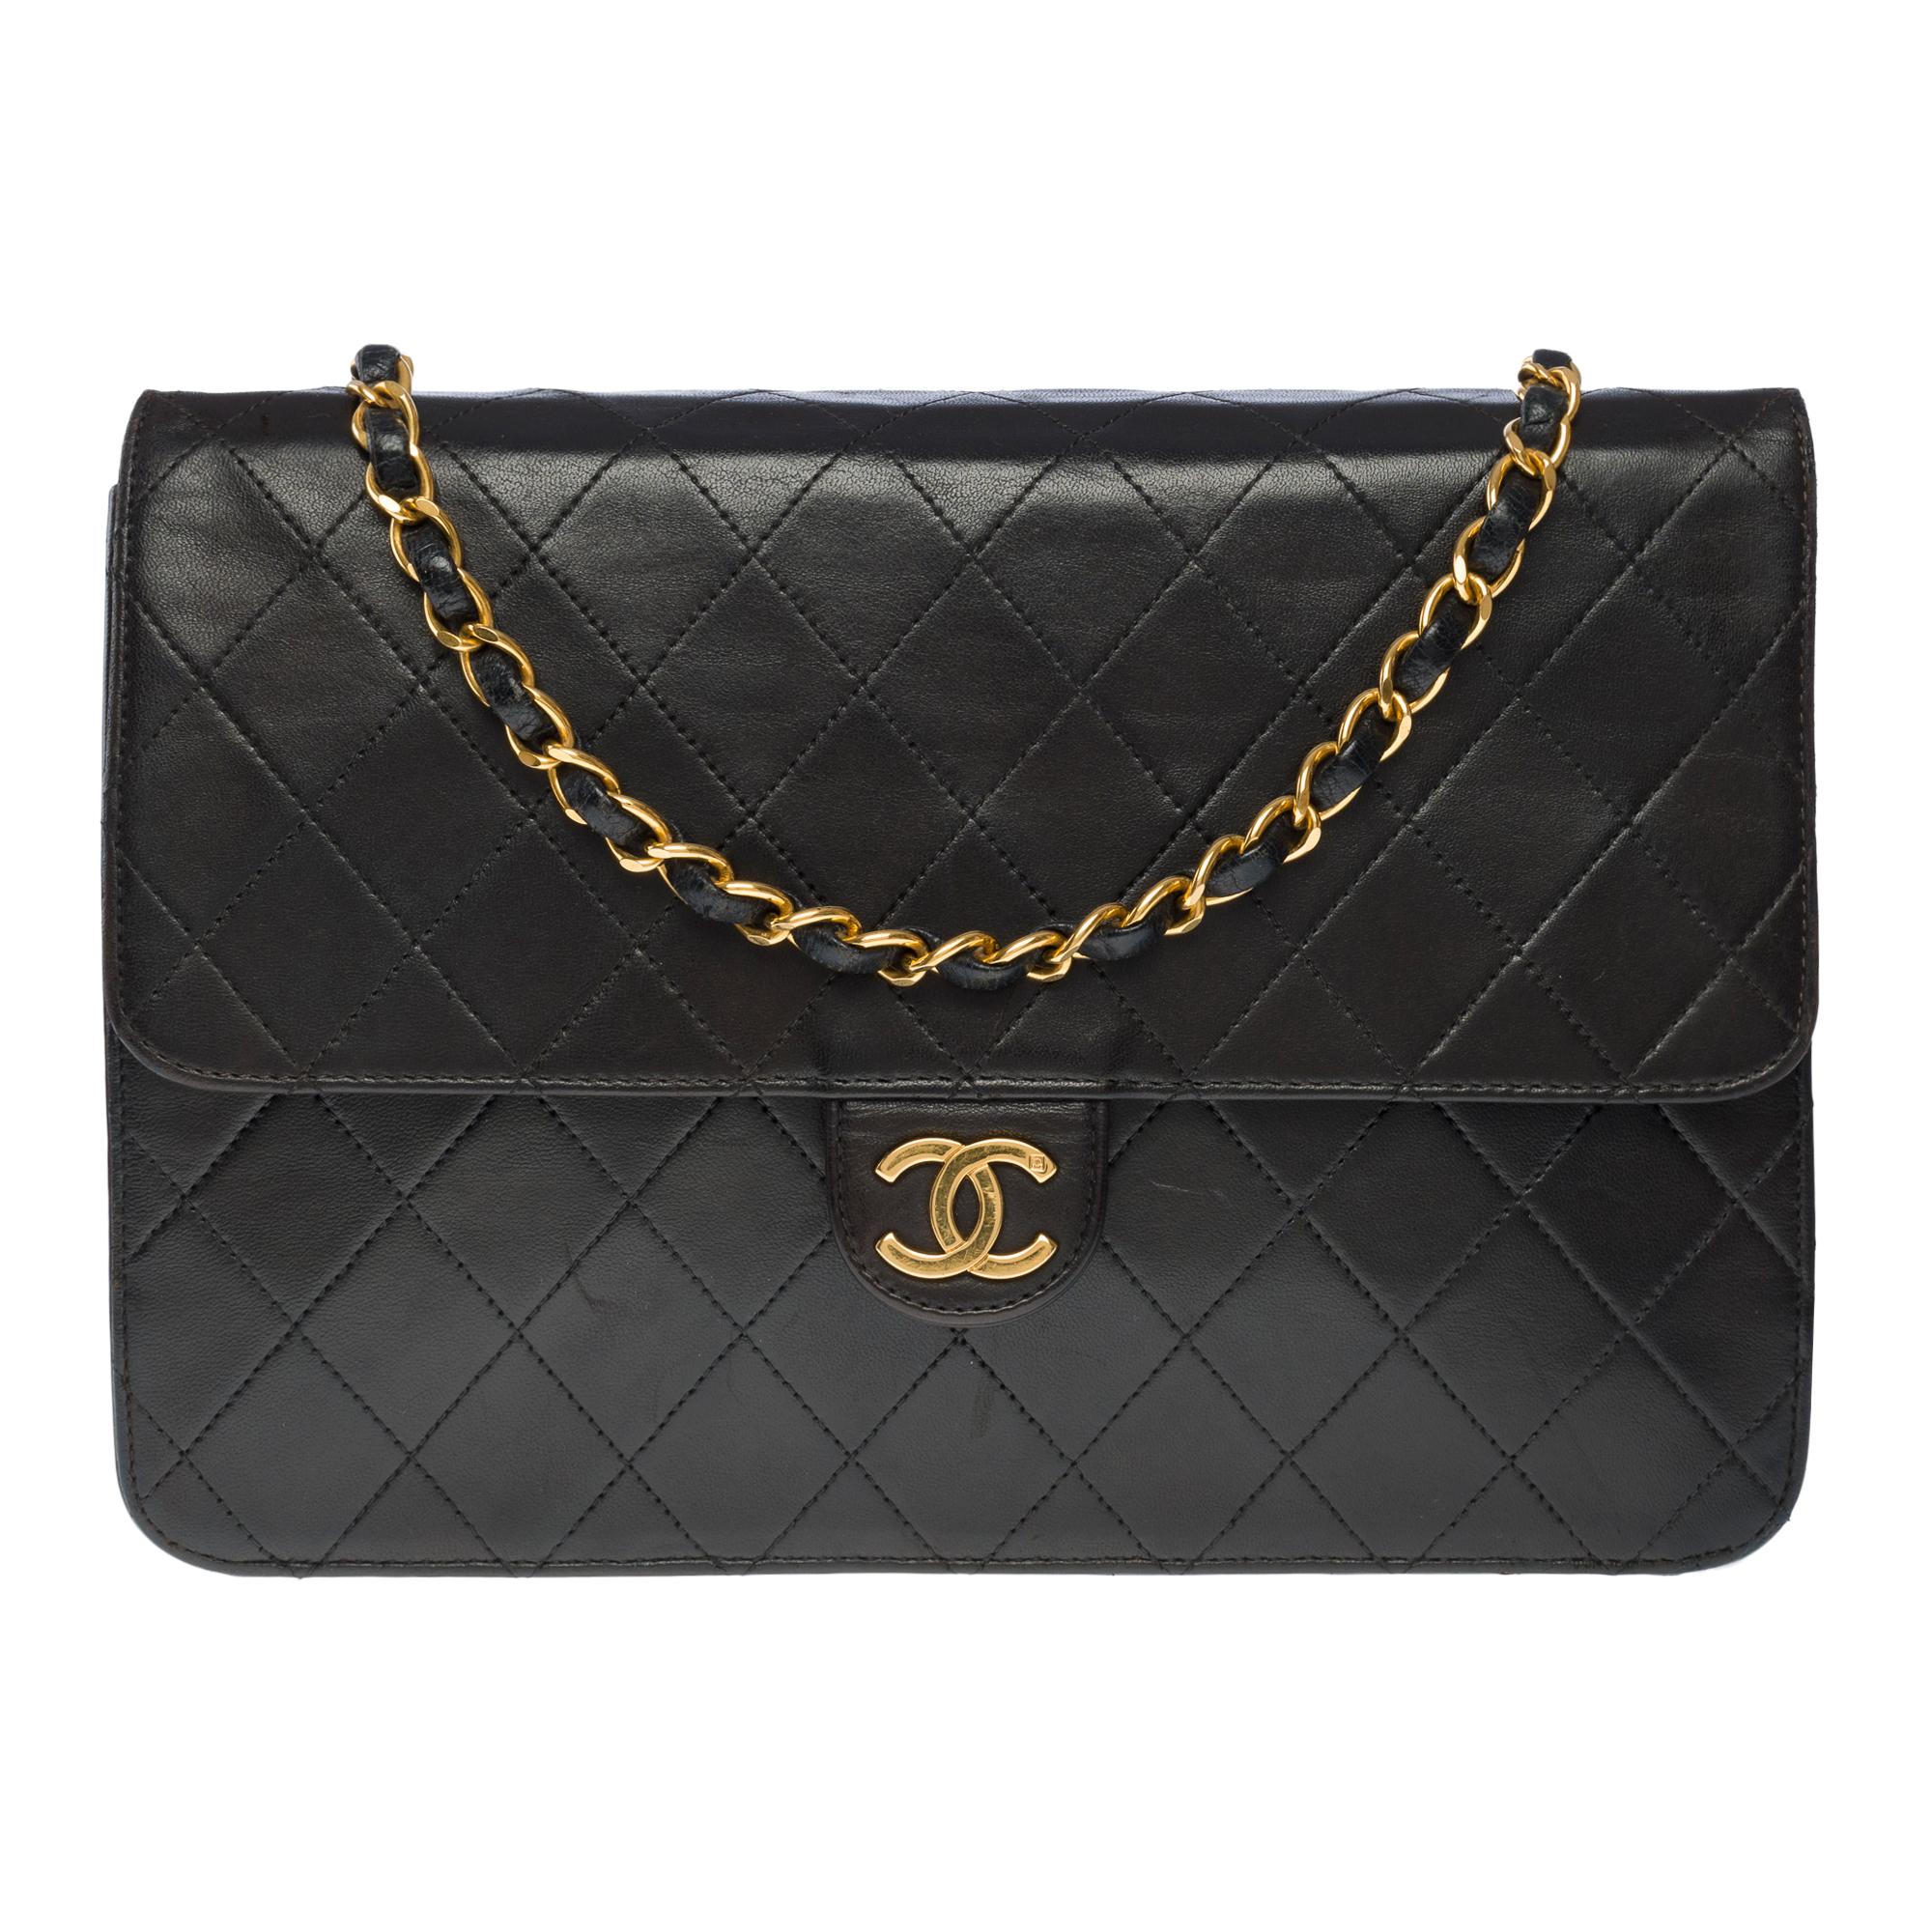 Beautiful​ ​Chanel​​ ​​Classic​​ ​​shoulder​​ ​​single​ ​flap​ ​bag​​ ​​in​​ ​​black​​ ​​quilted​​ ​​lambskin​​ ​​leather,​​ ​​gold​​ ​​metal​​ ​​trim,​​ ​​a​​ ​​chain-handle​​ ​​in​​ ​​gold​​ ​​metal​​ ​​interlaced​​ ​​with​​ ​​black​​ ​​leather​​